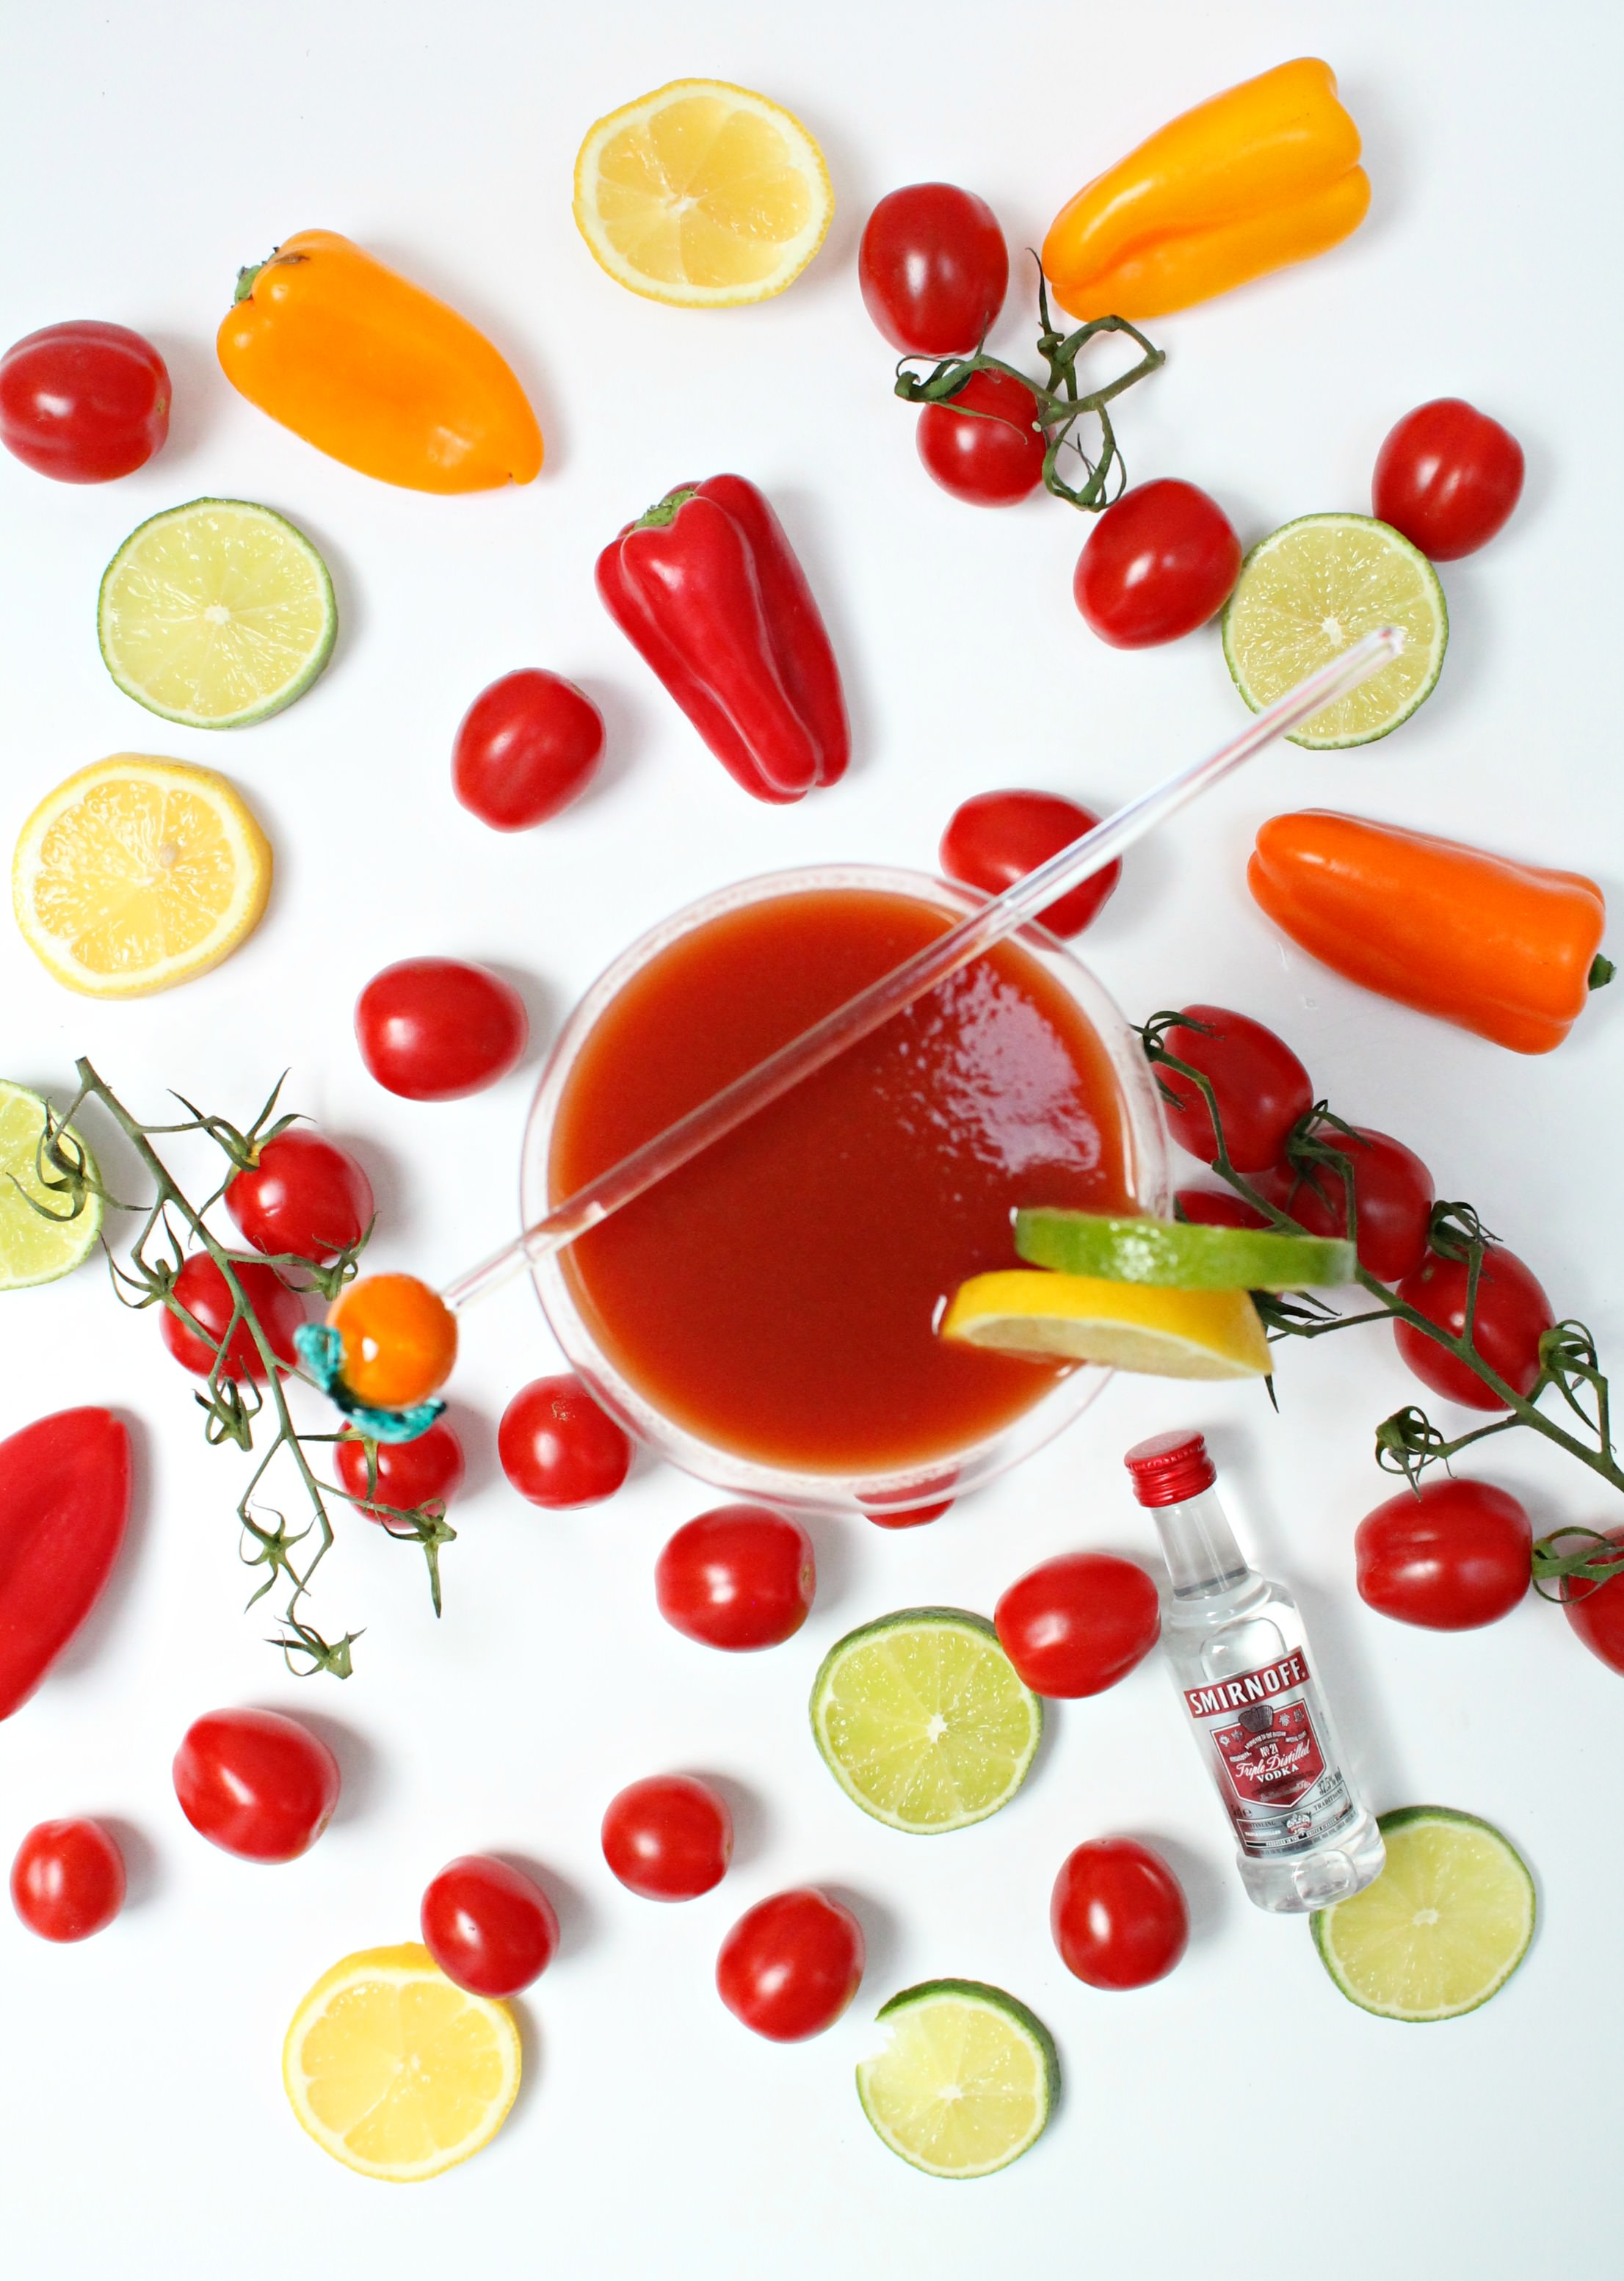 Classic-Bloody-Mary-with-Smirnoff-photo-and-styling-by-Little-Big-Bell